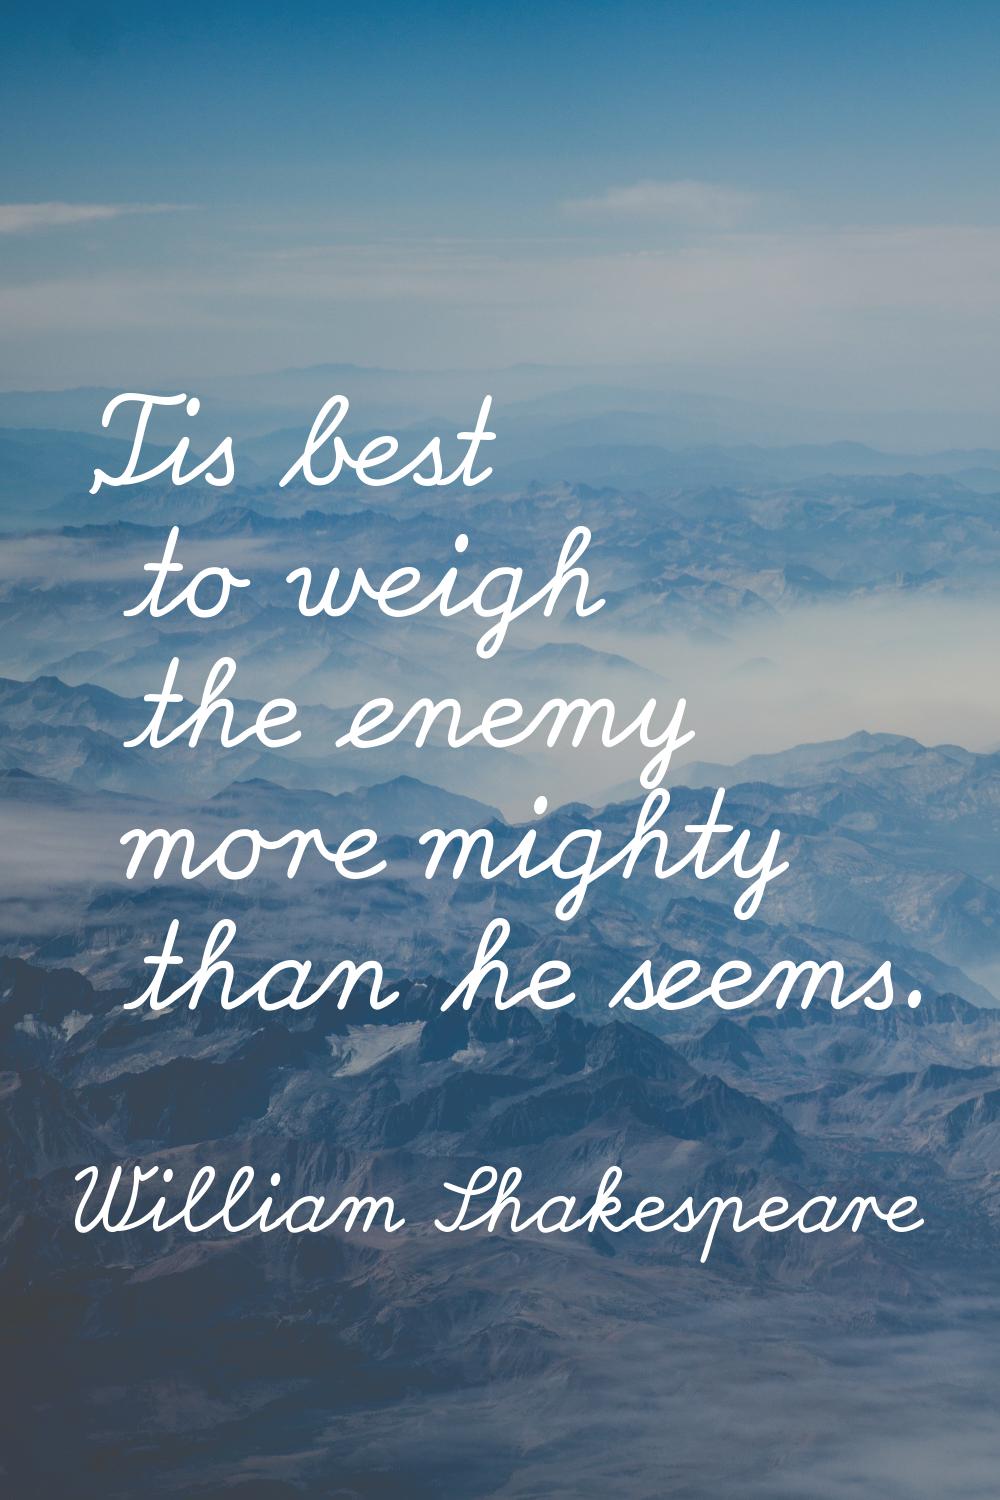 'Tis best to weigh the enemy more mighty than he seems.